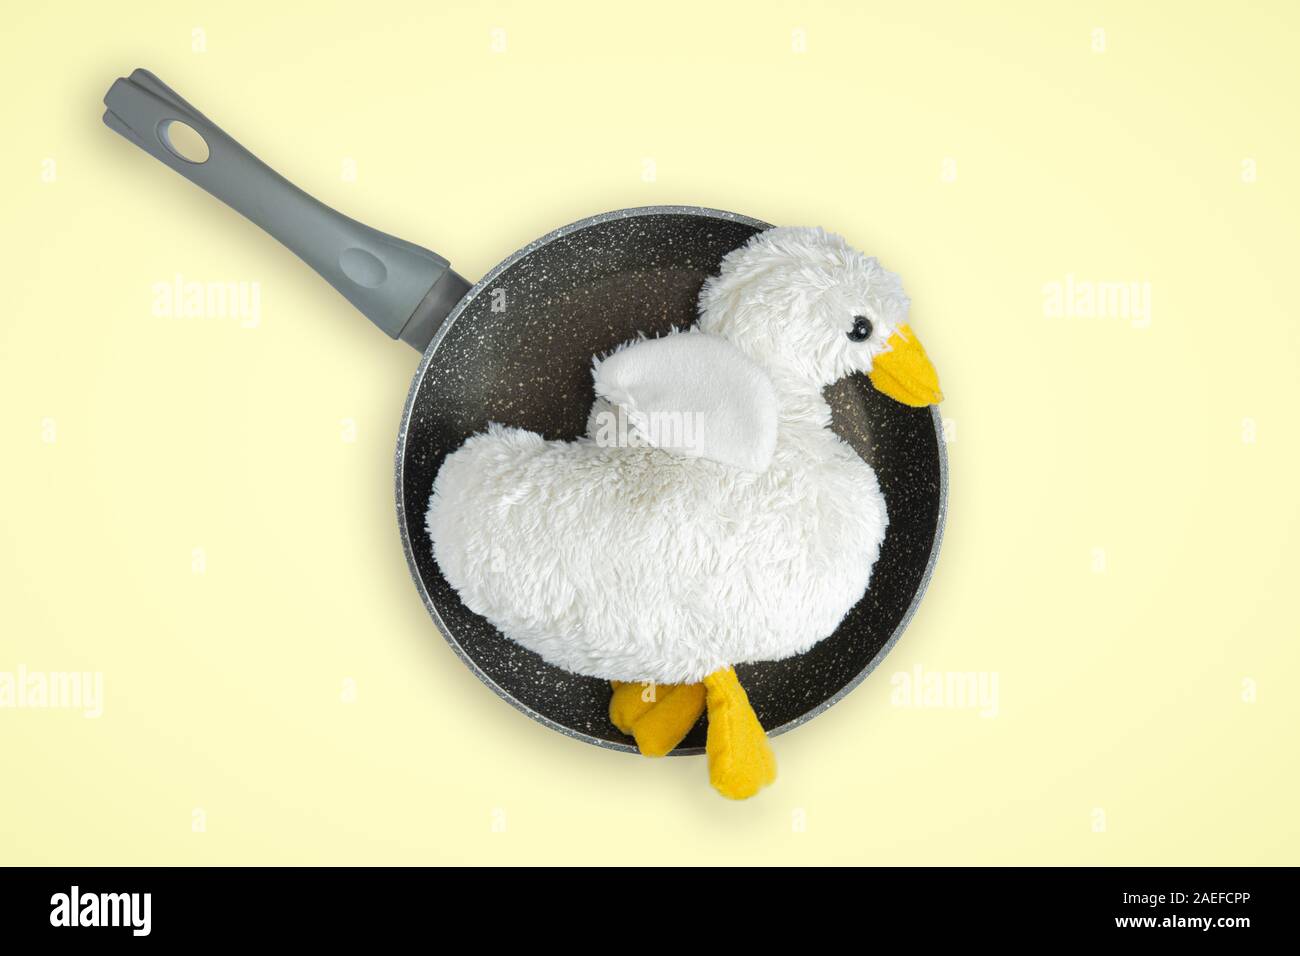 Fluffy toy bird on a frying pan, top view. Meat industry, poultry consumption concept Stock Photo